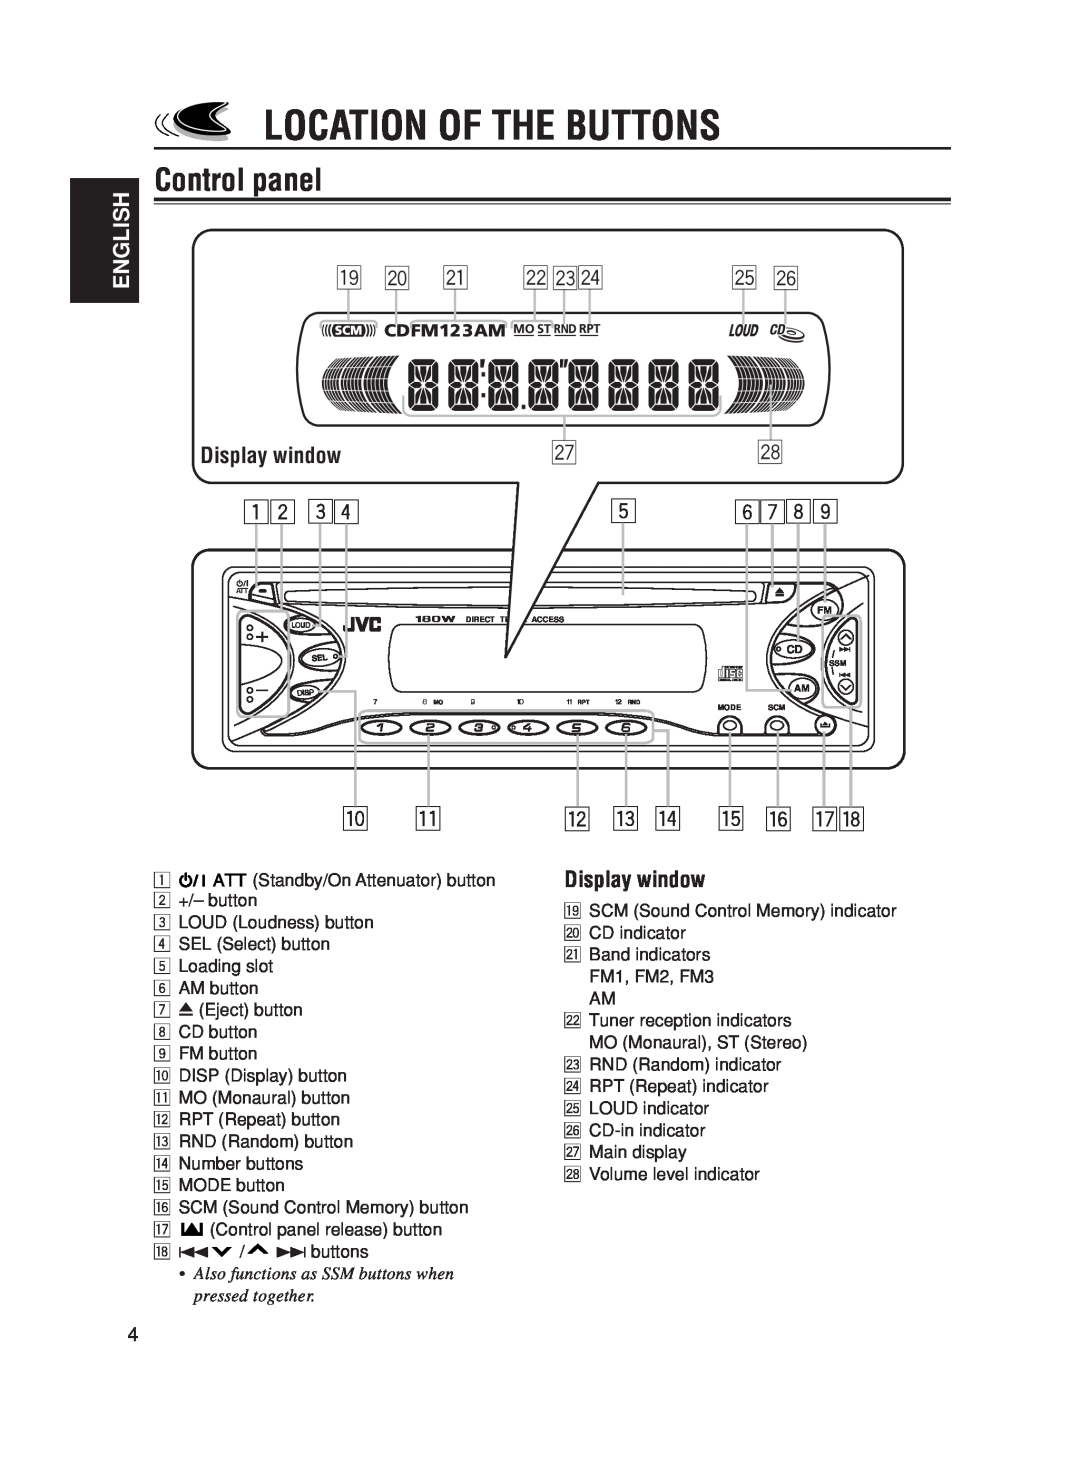 JVC KD-S10, KD-S5050 manual Location Of The Buttons, Control panel 